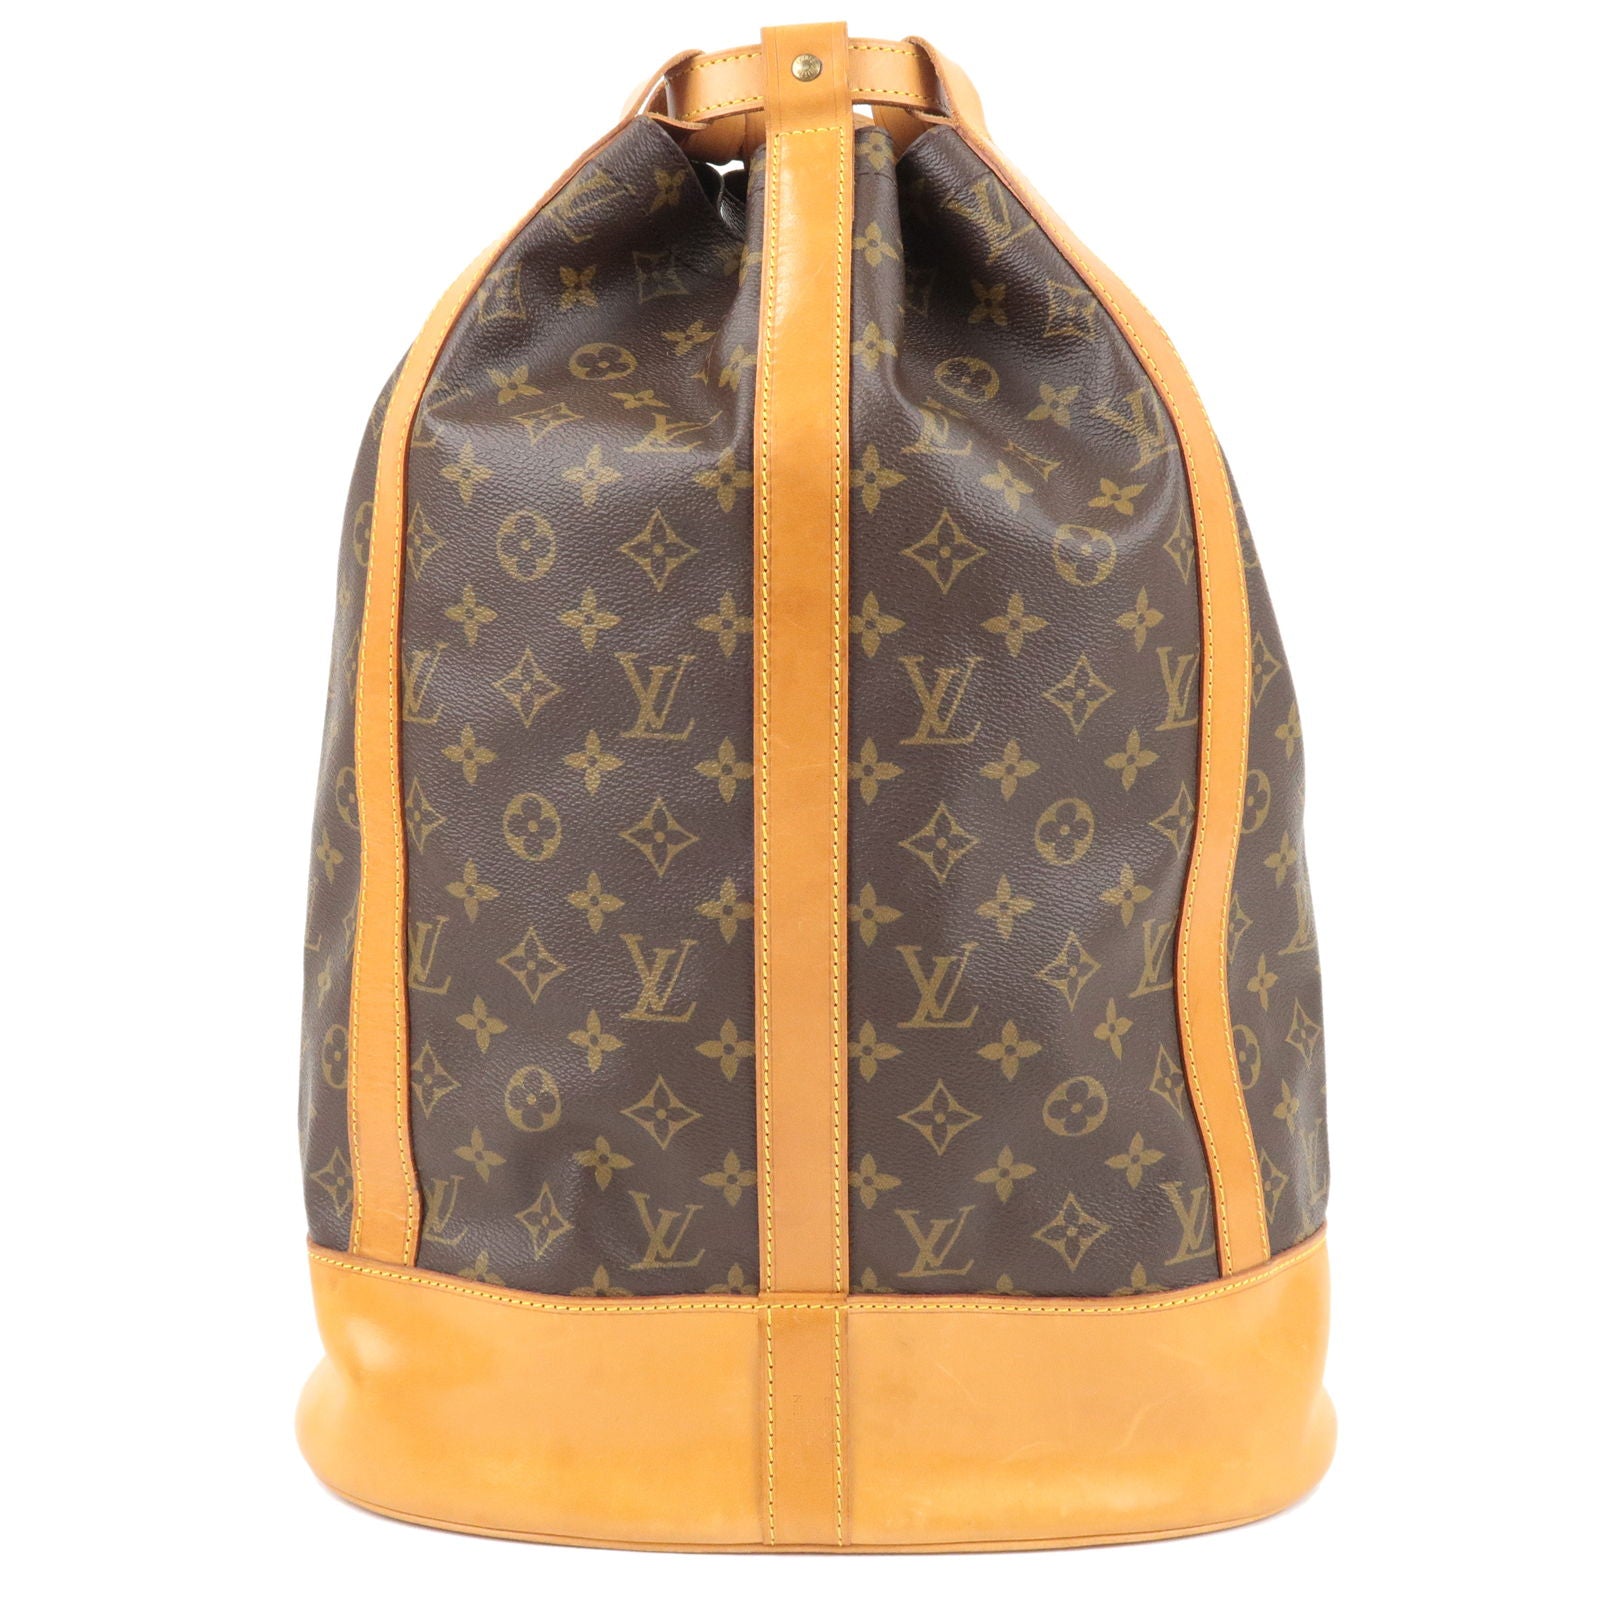 Authentic Louis Vuitton Mono Randonnee GM Backpack for Sale in